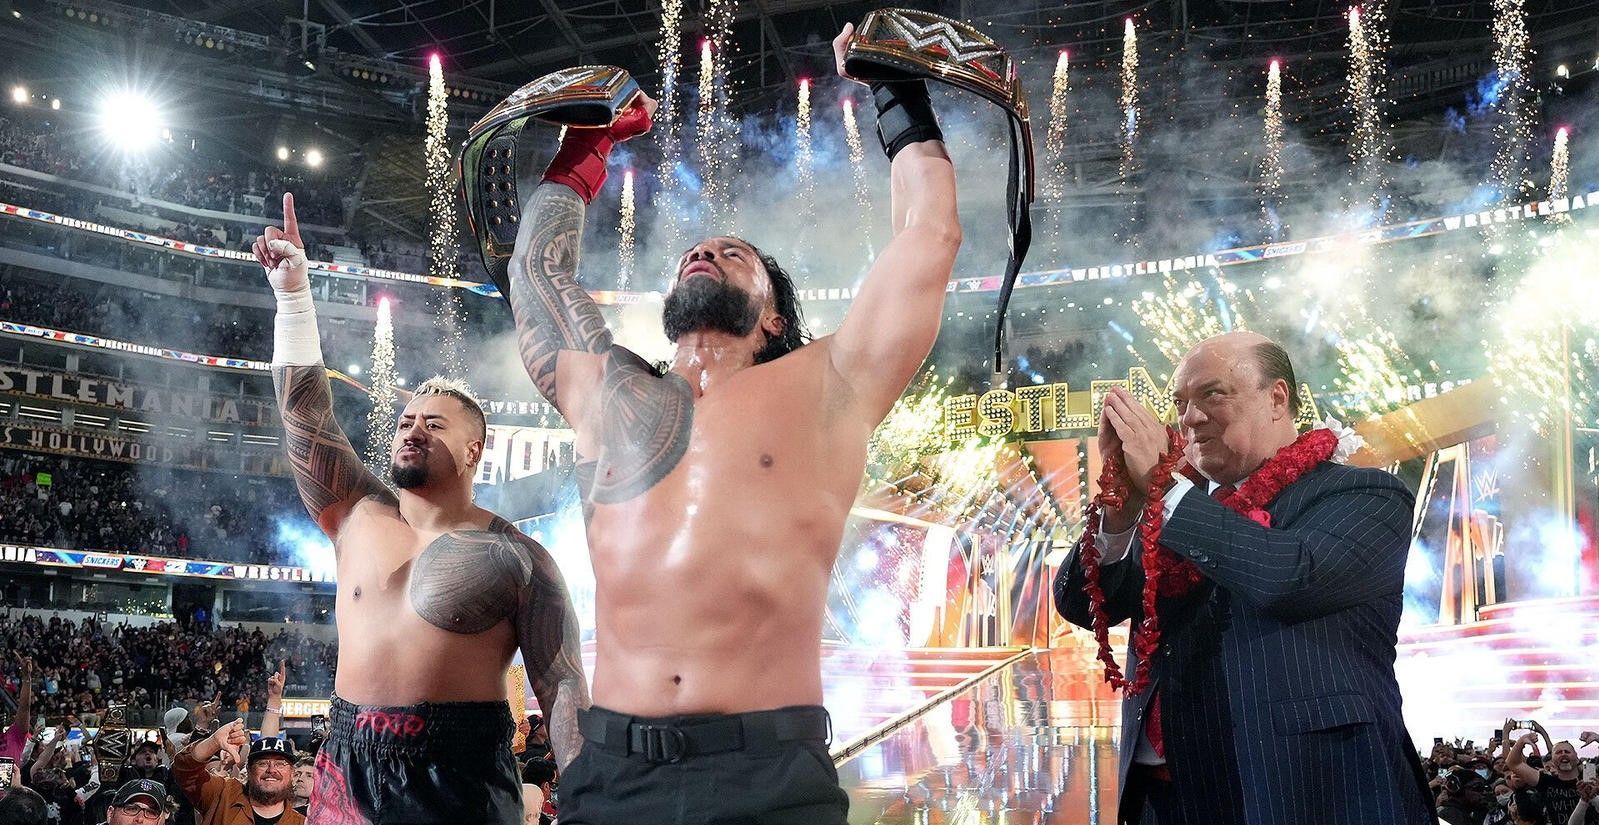 Roman Reigns emerged victorious at WrestleMania